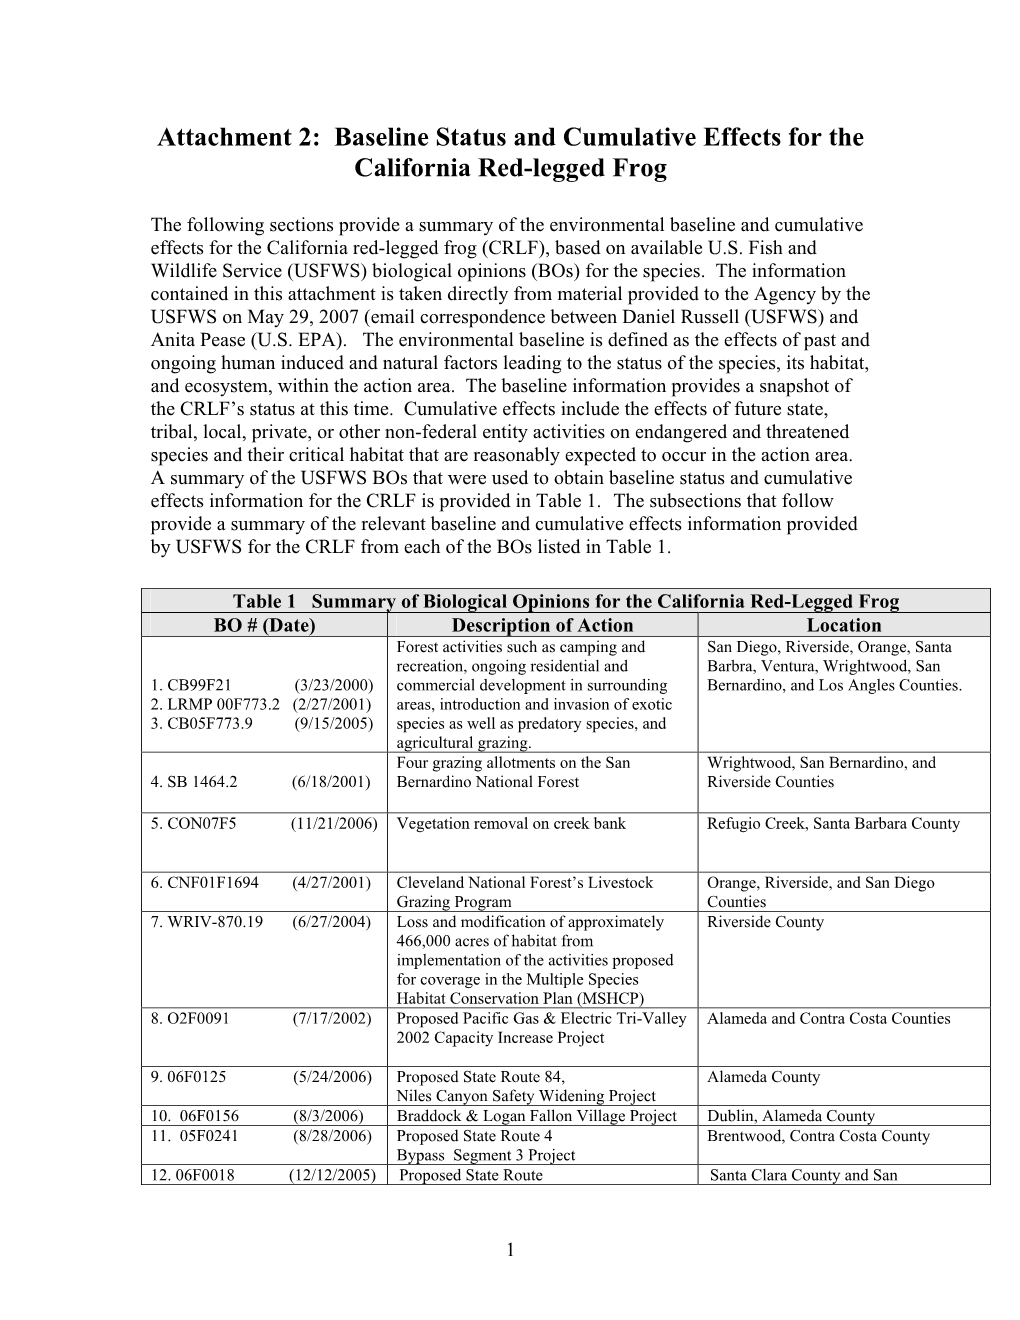 Attachment 2: Baseline Status and Cumulative Effects for the California Red-Legged Frog